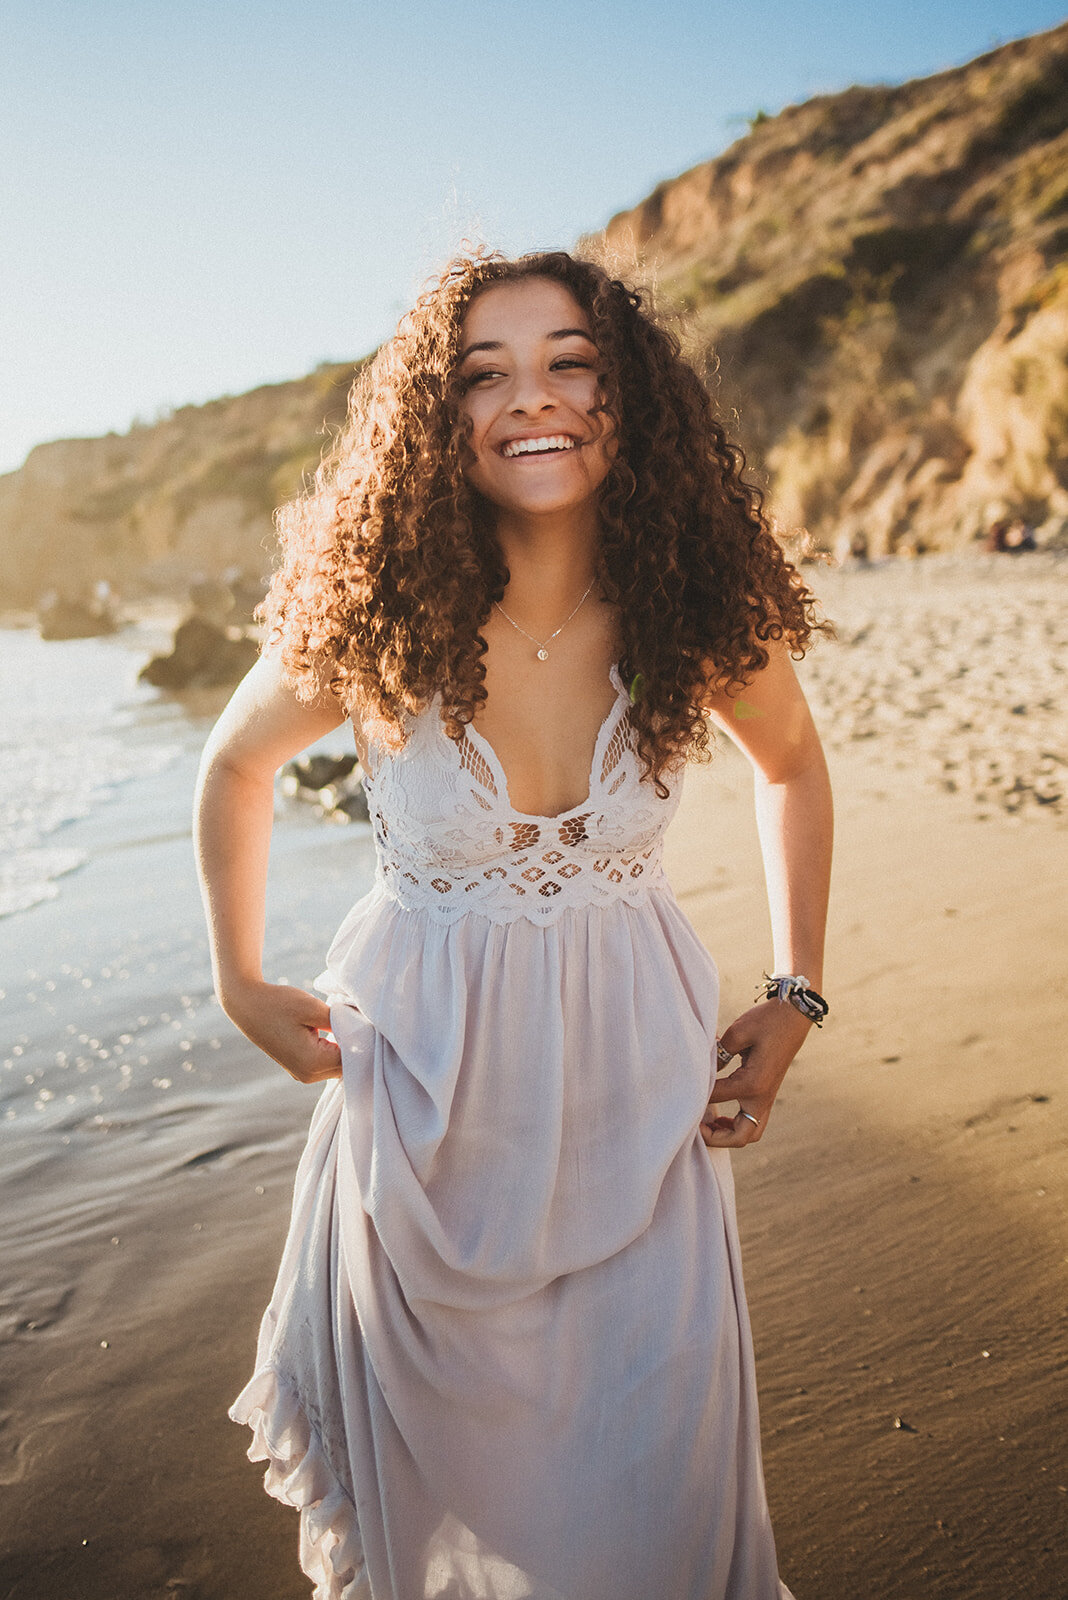 Olivia pulls her white dress out of the water and laughs at El Matador beach.